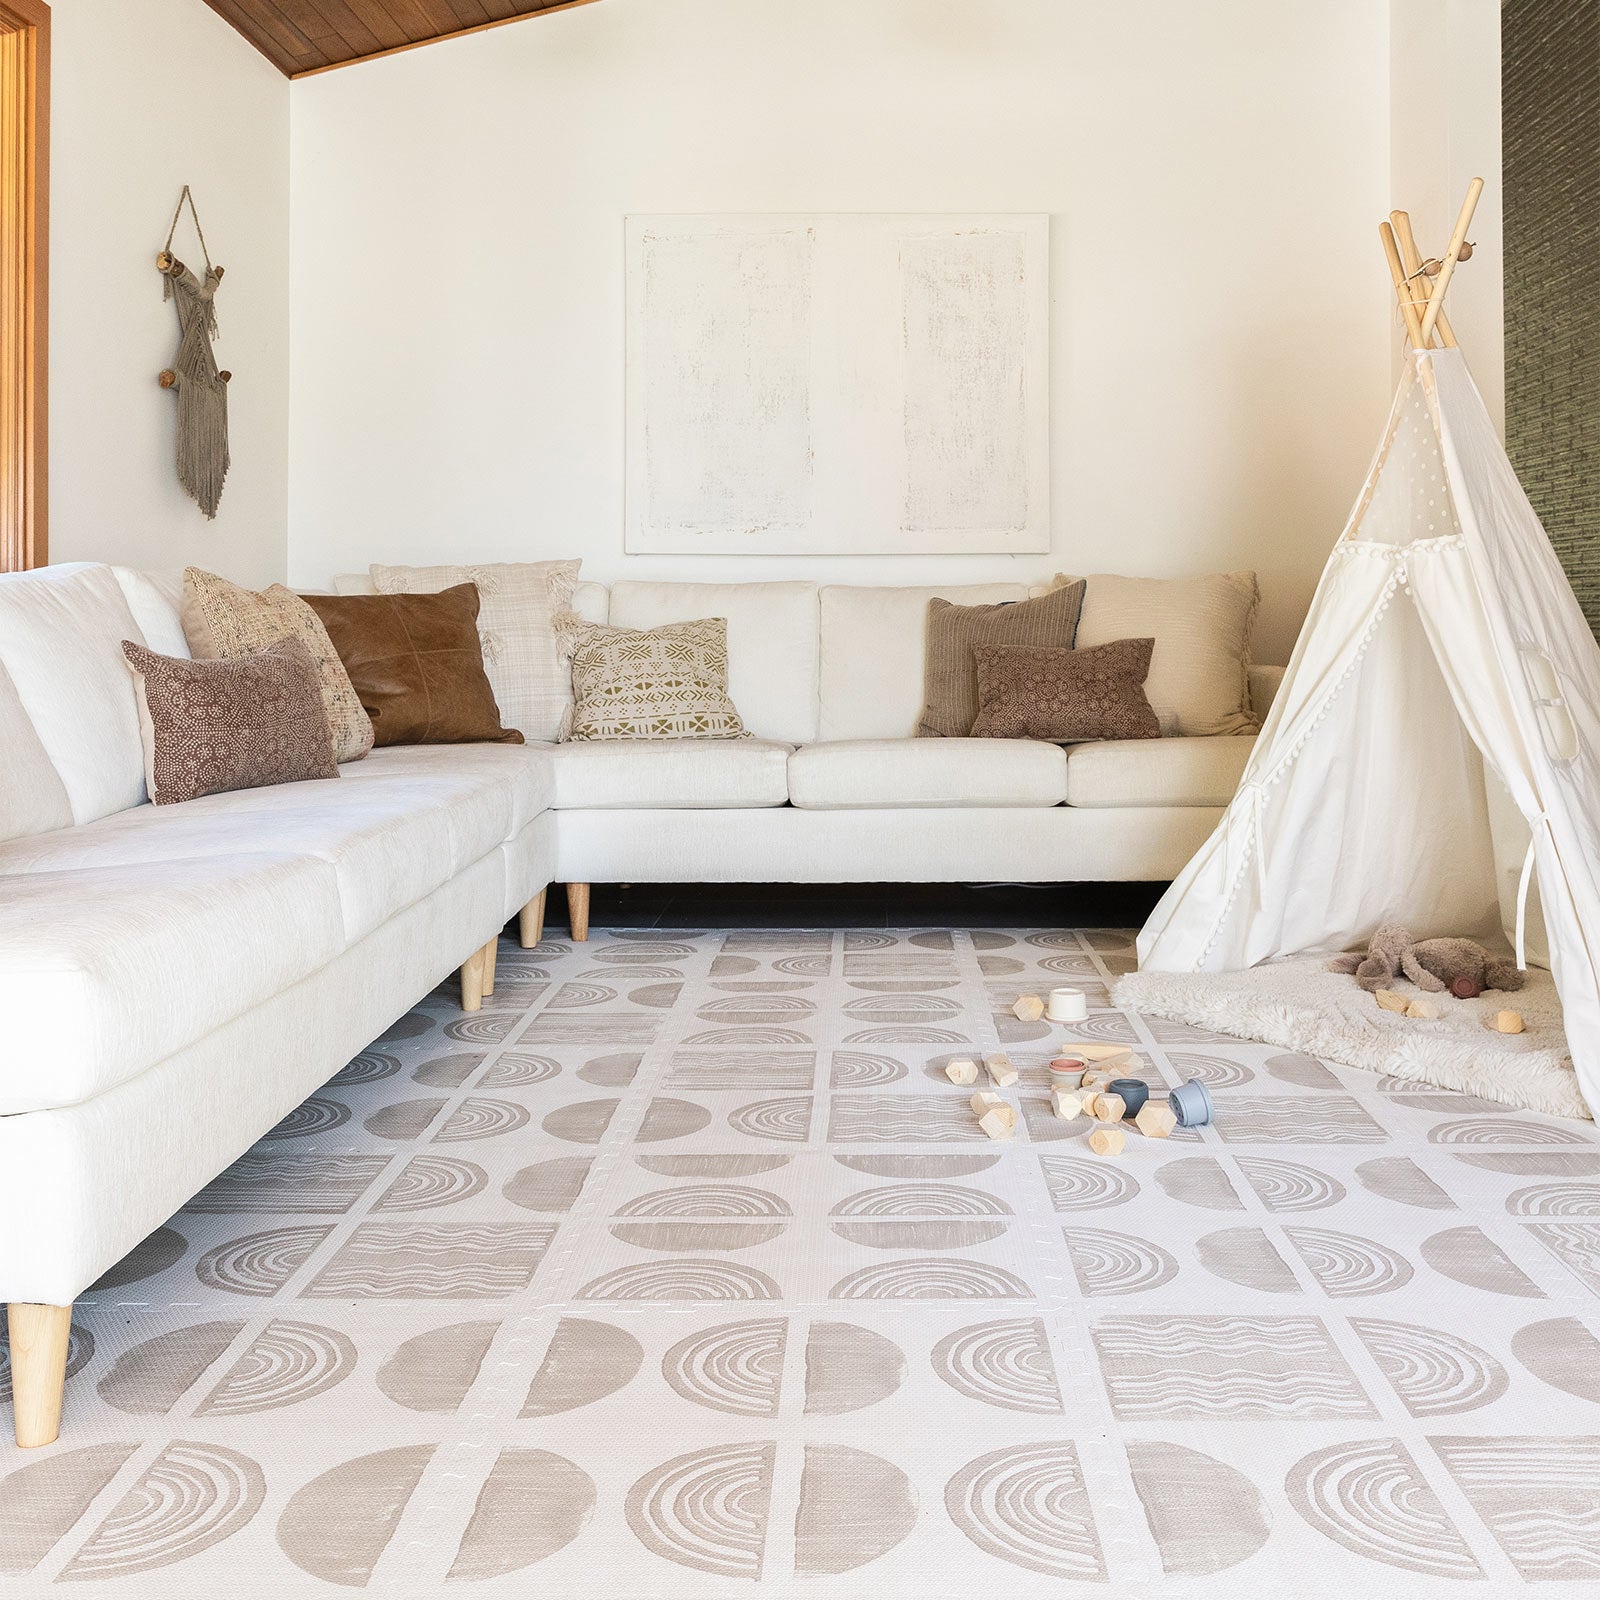 Ada modern minimalist baby play mat in Pebble taupe and off white. Shown in living room with toys.